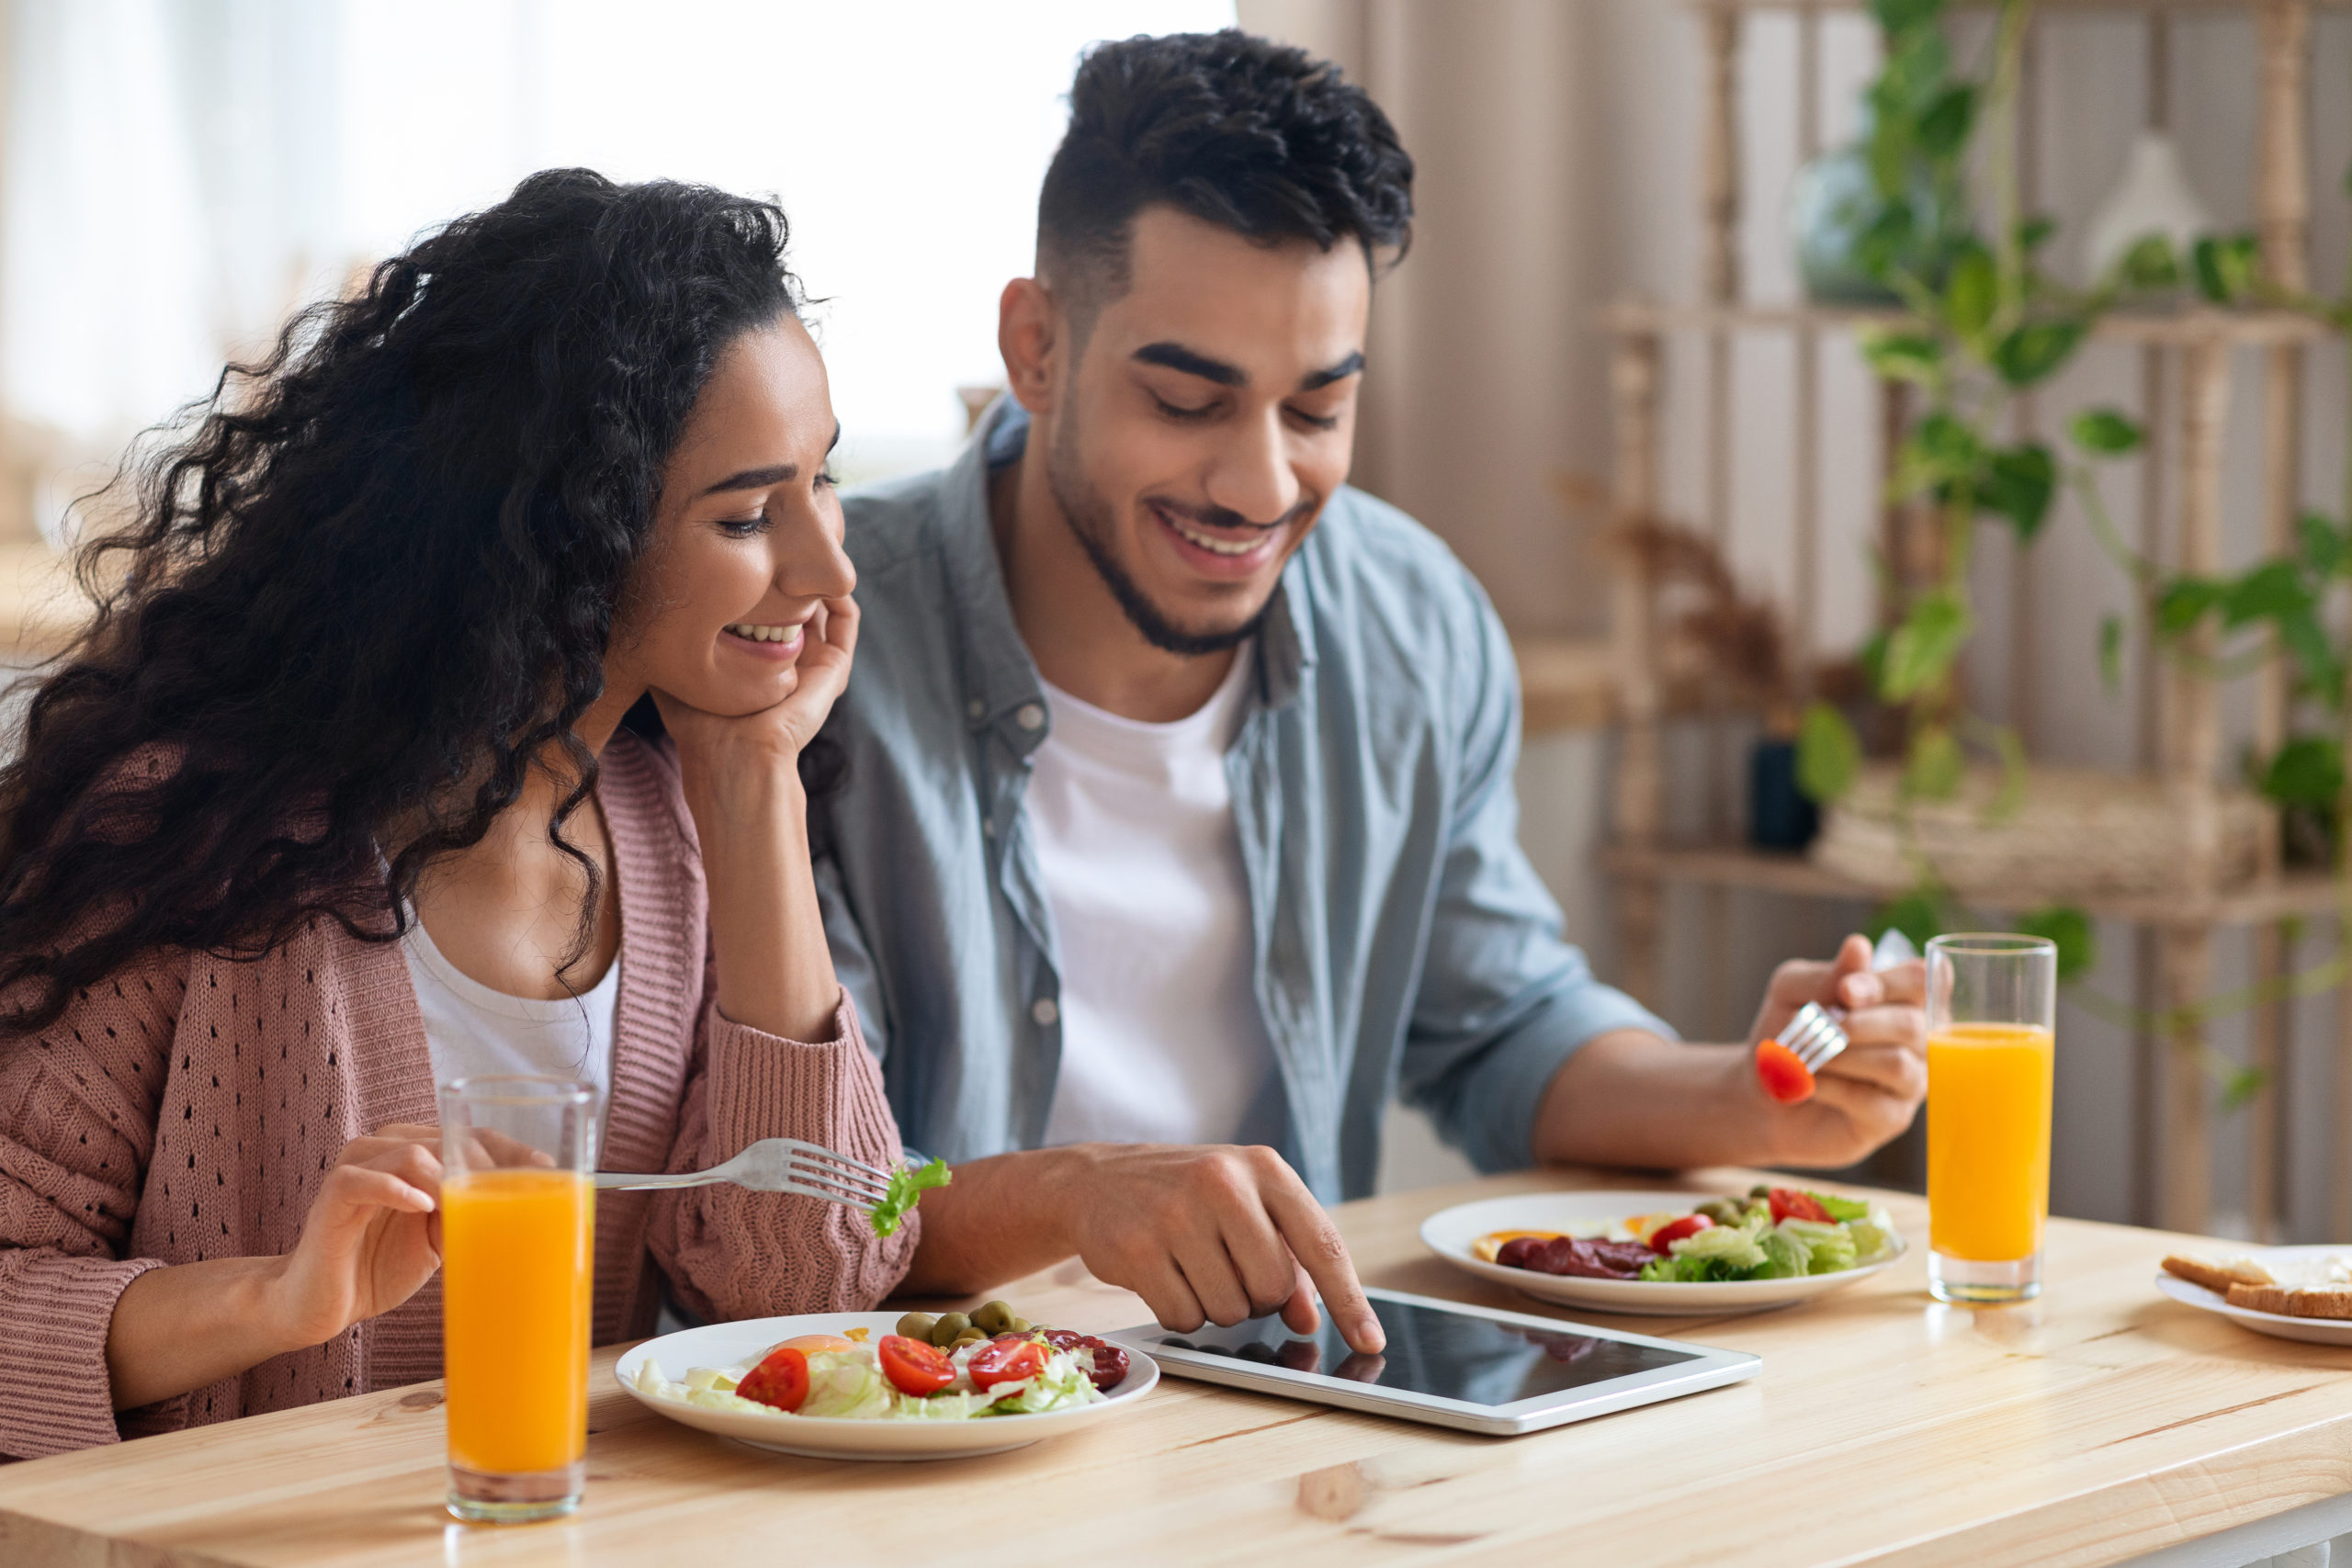 Joyful Middle-Eastern Couple Shopping Online With Digital Tablet While Having Breakfast In Kitchen, Young Arab Spouses Purchasing Grocery Delivery Or Browsing Internet While Enjoying Their Meal